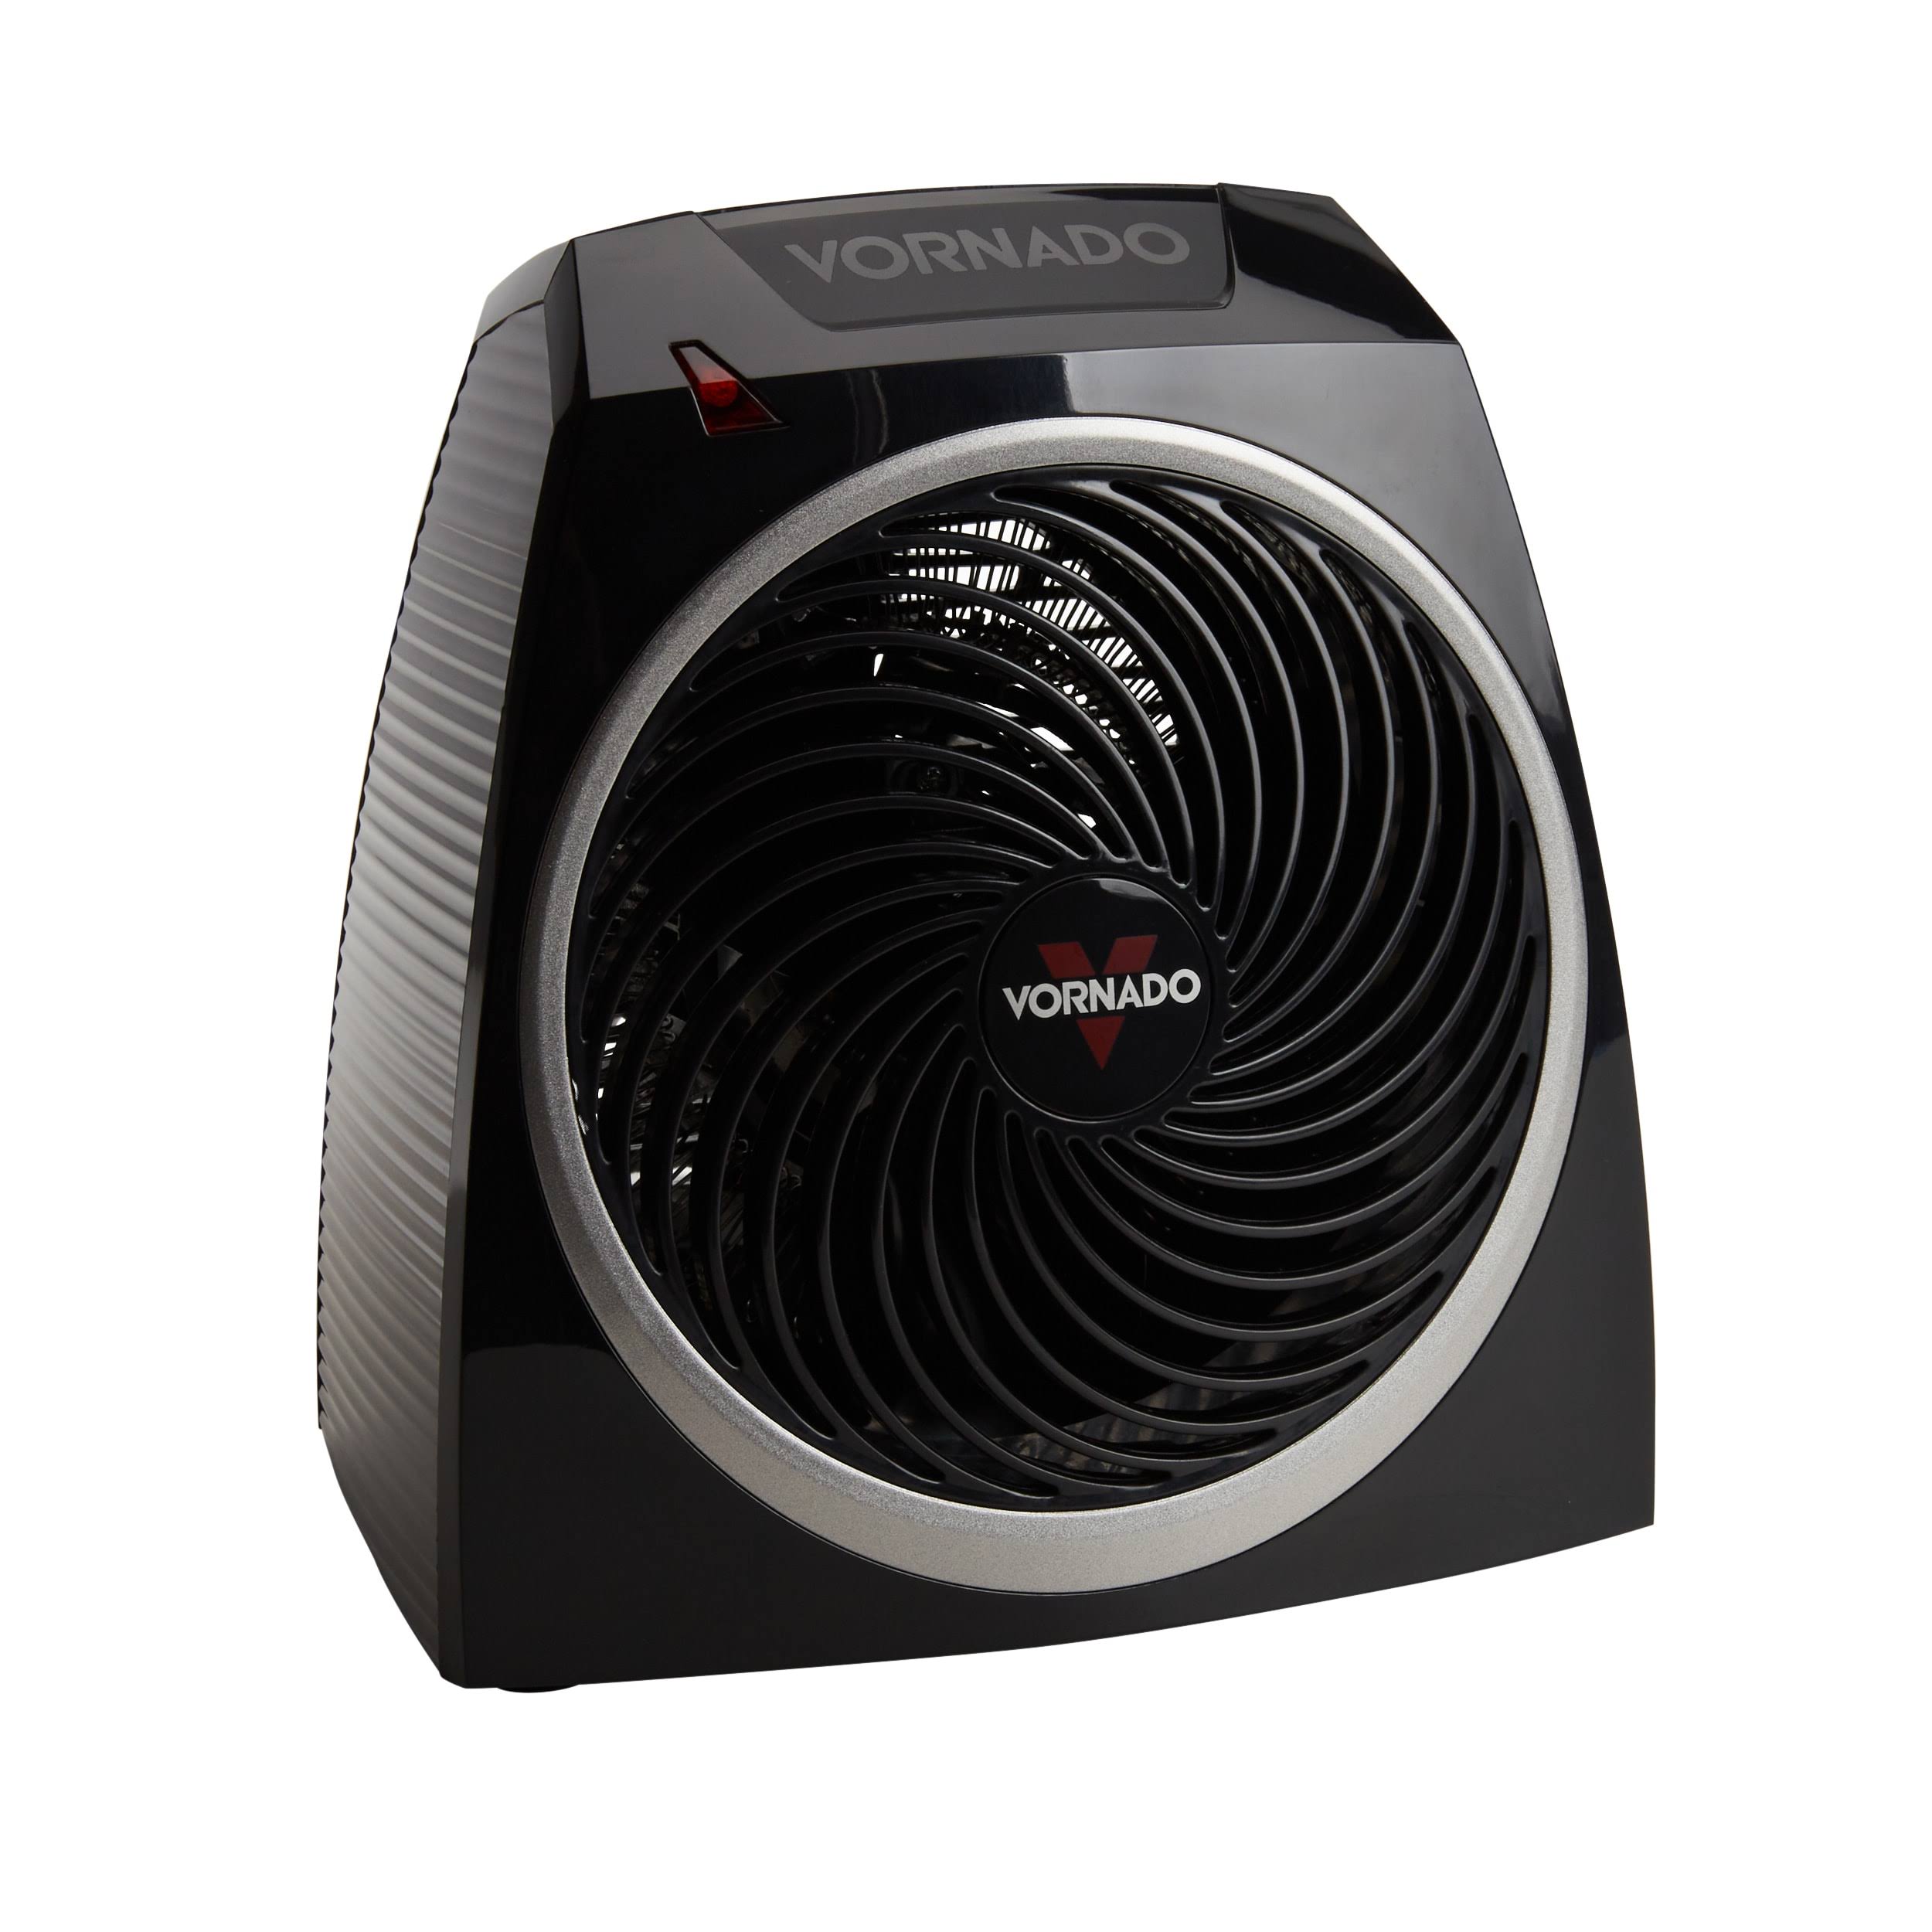 Vornado Vh202 Personal Electric Space Heater - 75 Square Feet